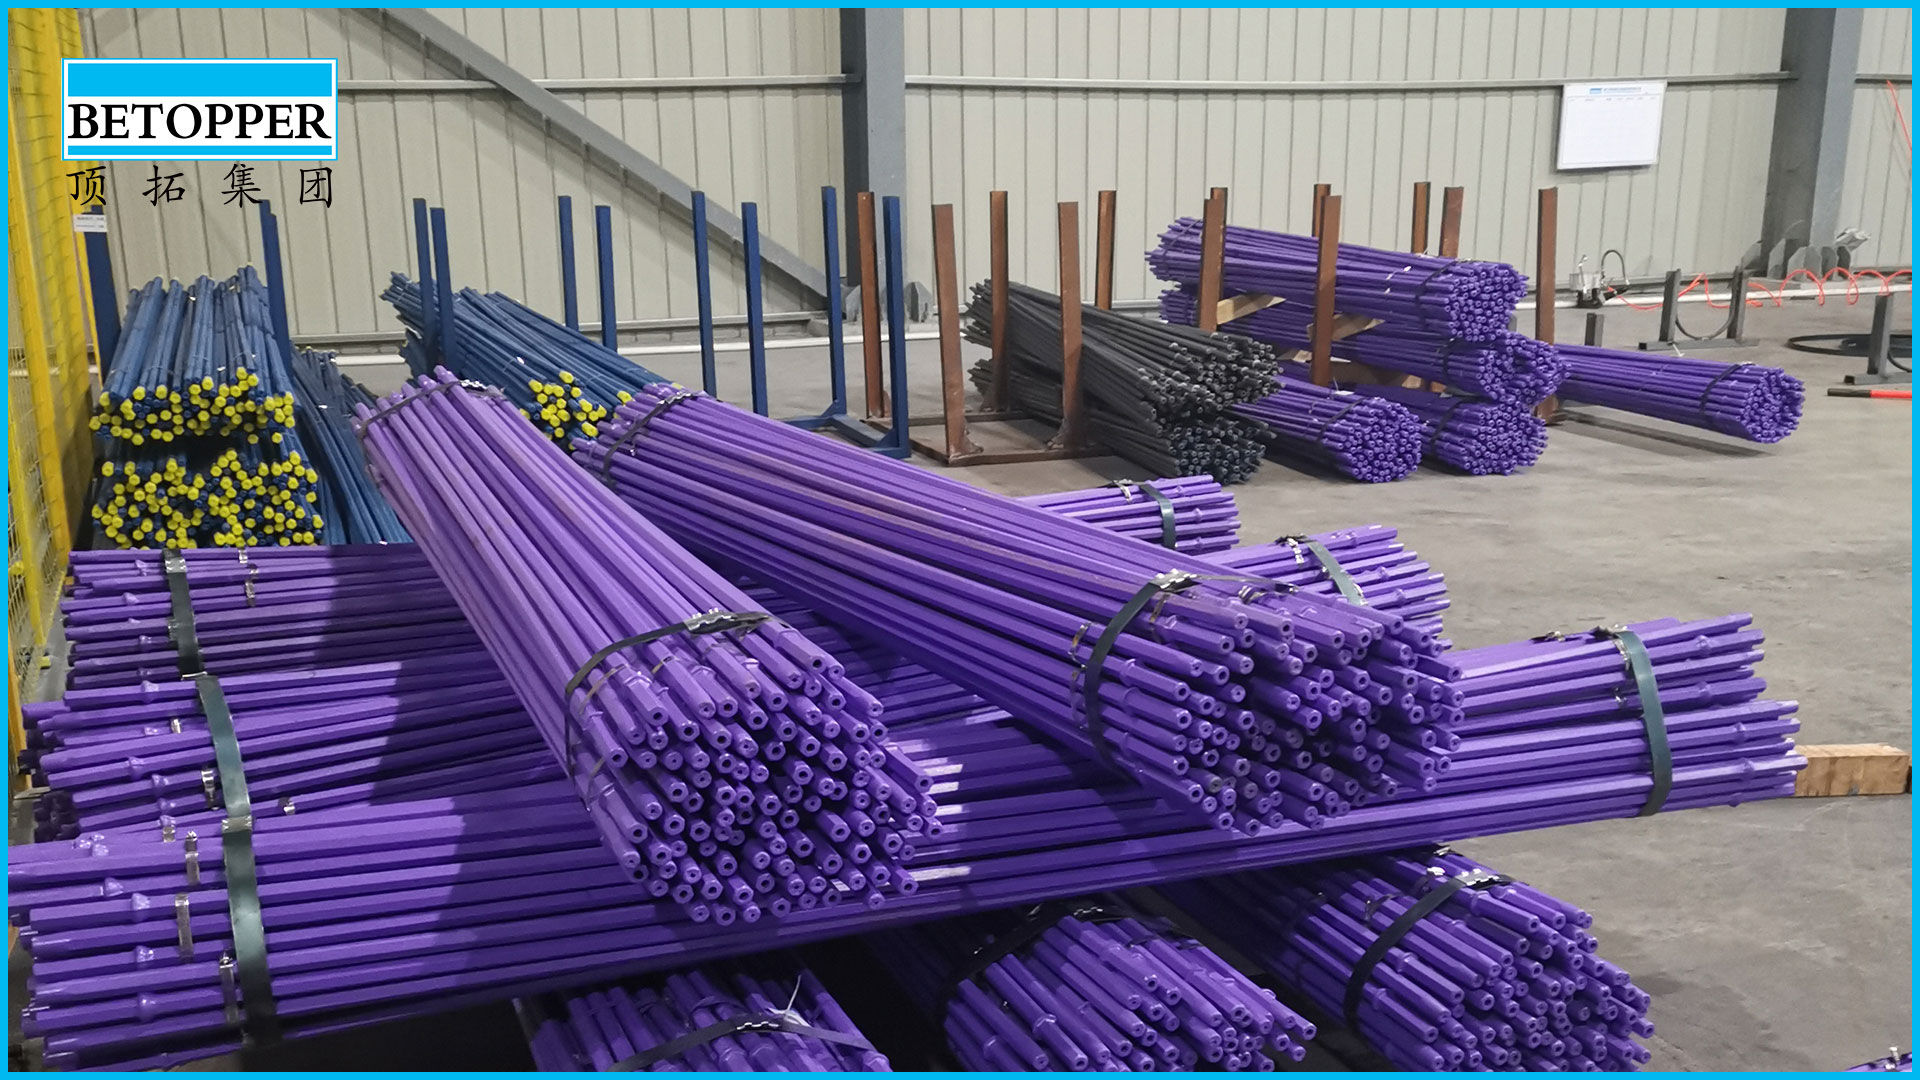 Betopper Group Drill Rod Factory Warehousing and Delivery Area